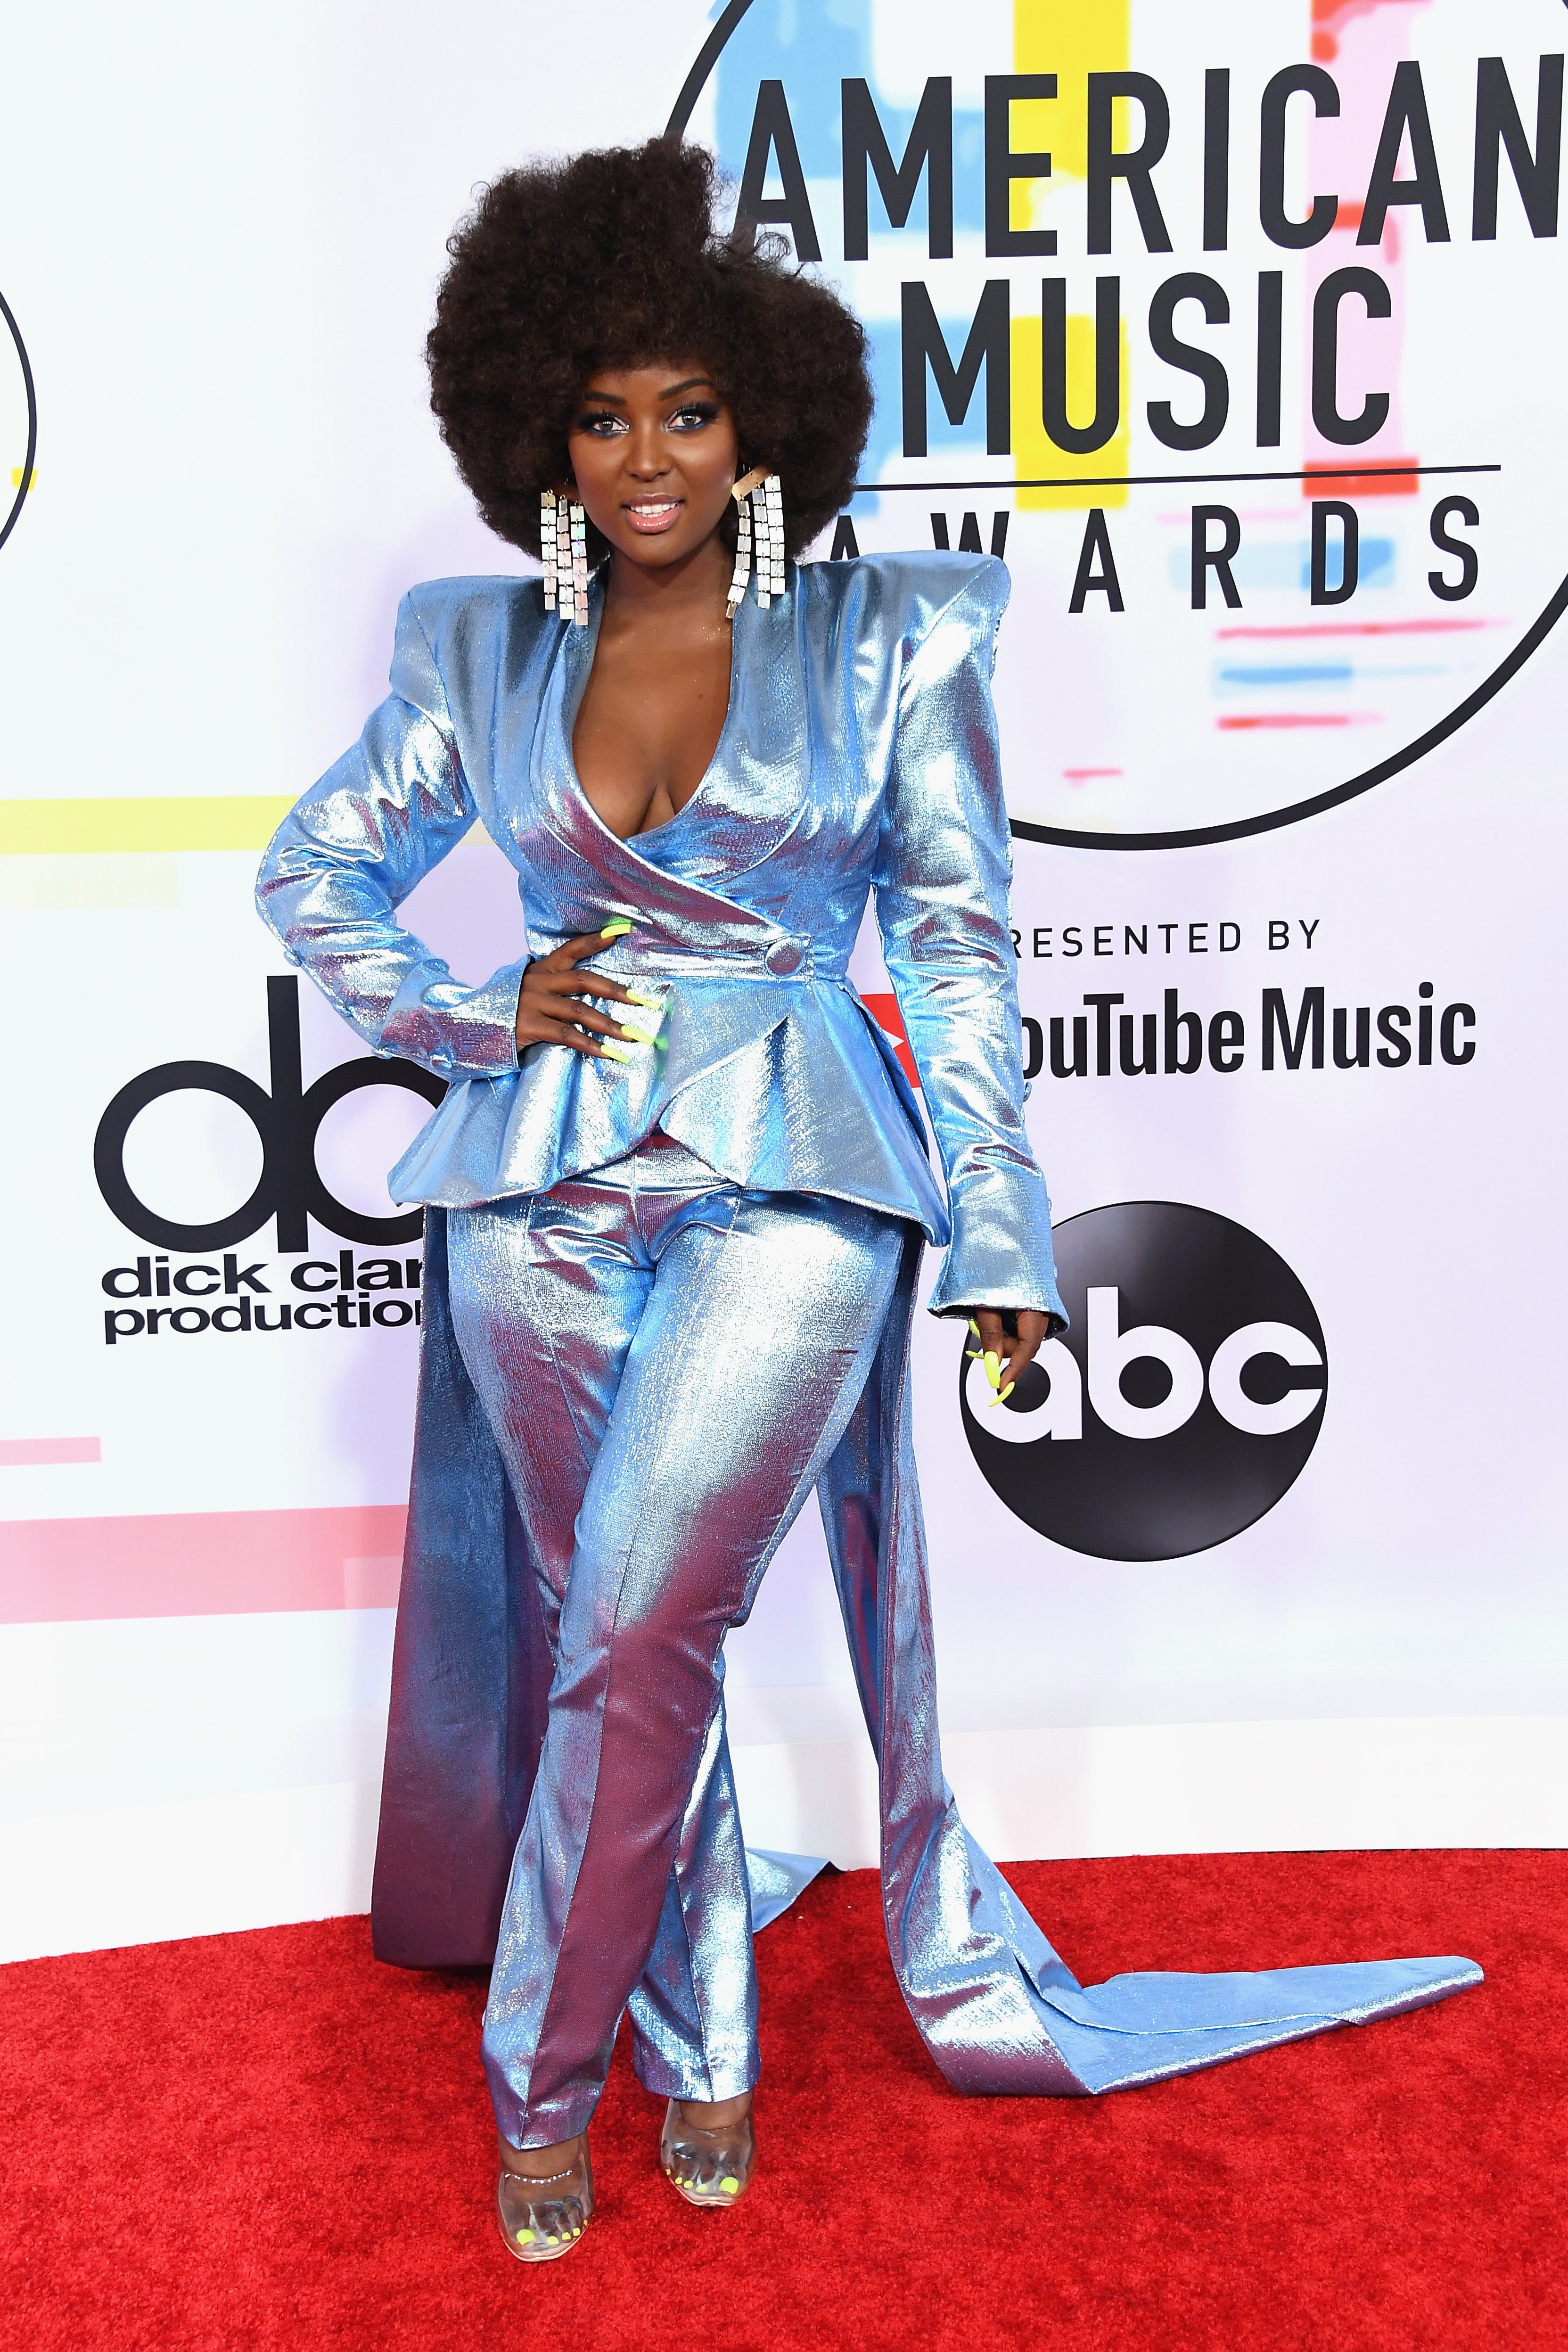 Tracee Ellis Ross, Cardi B And Many More Slayed The 2018 American Music Awards Red Carpet